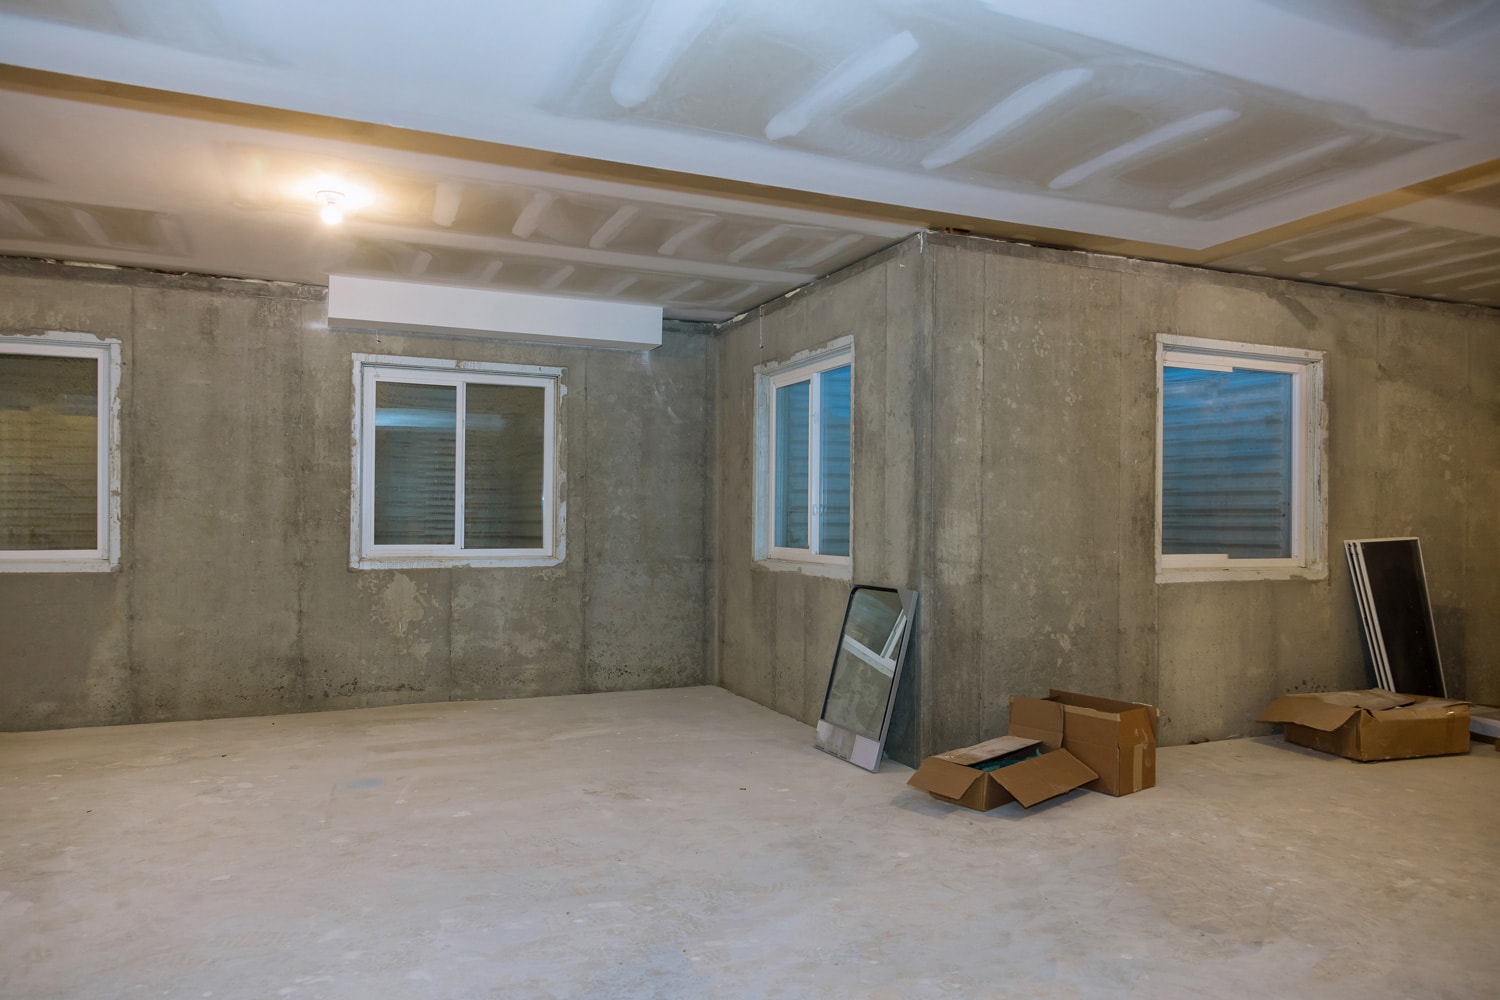 Unfinished view on concrete floor construction of basement empty under construction of residential home